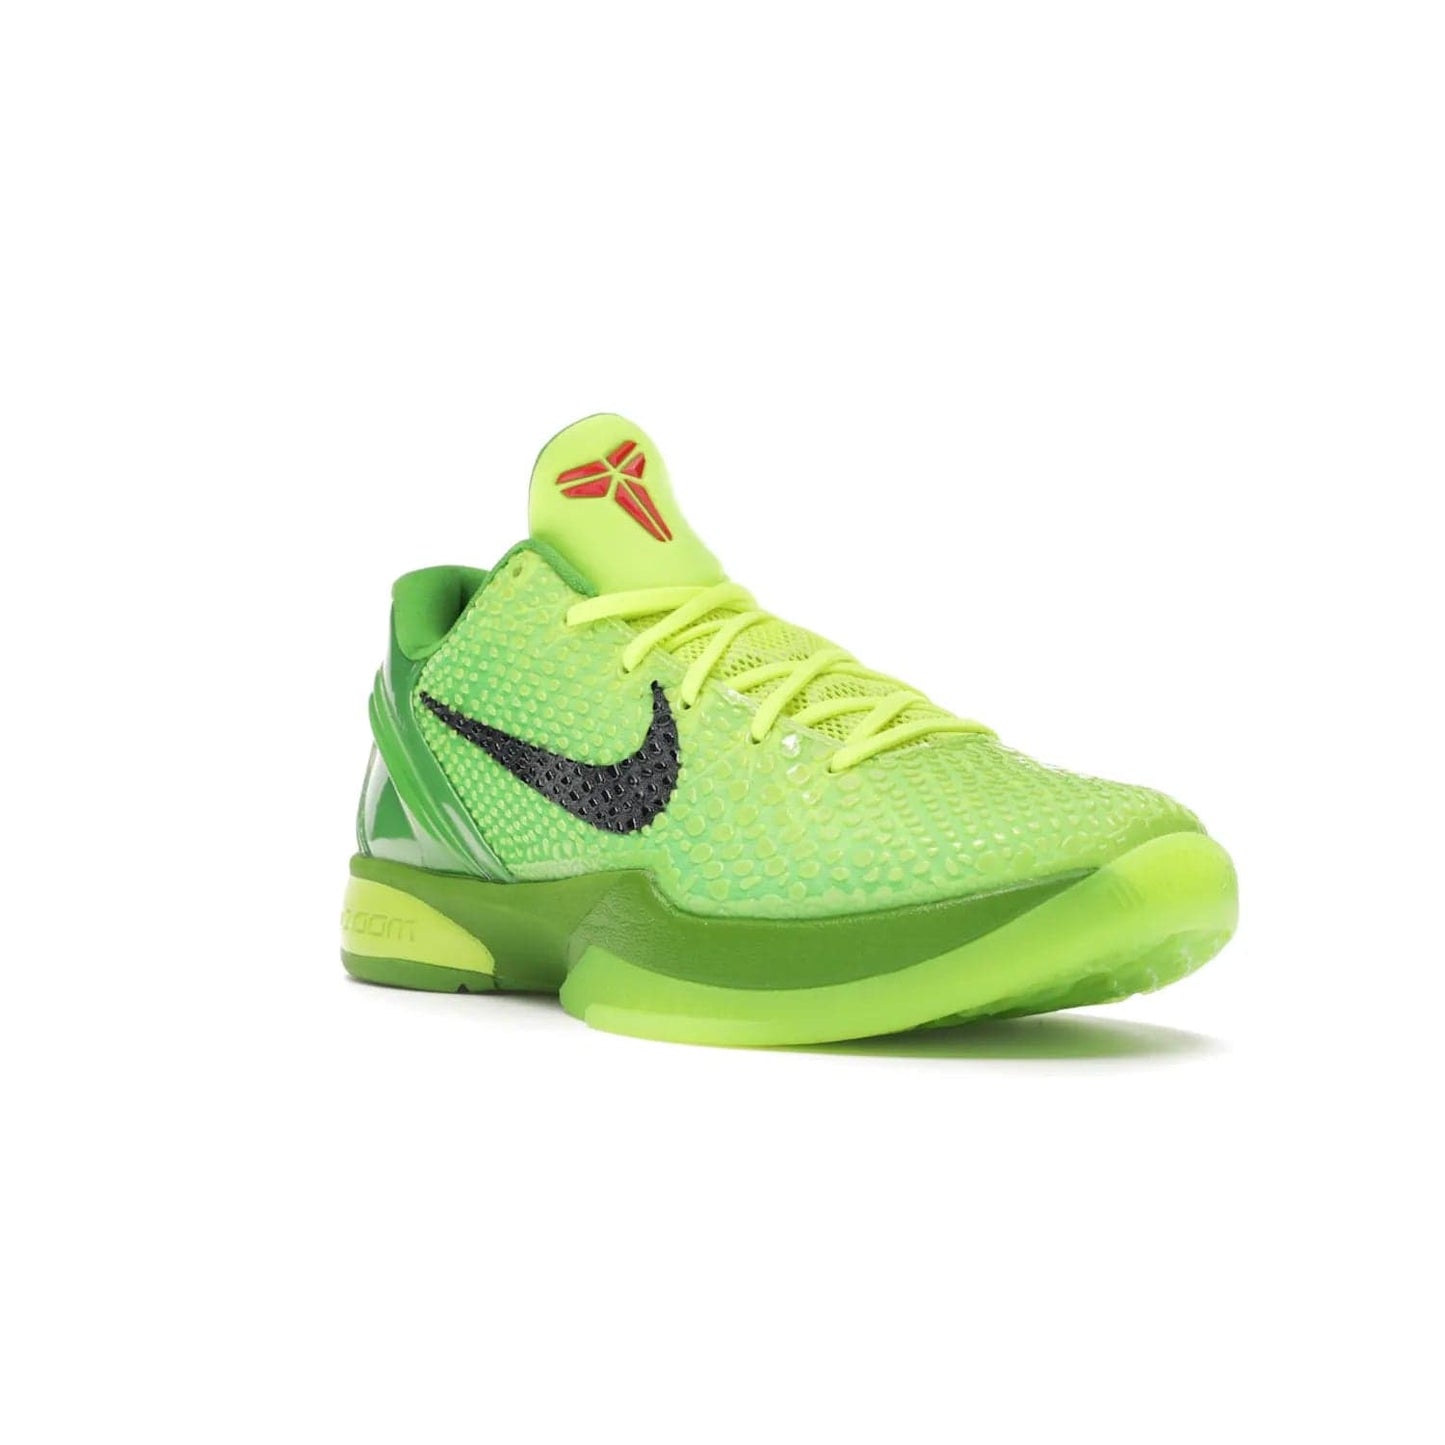 Nike Kobe 6 Protro Grinch (2020) - Image 6 - Only at www.BallersClubKickz.com - #
The Nike Kobe 6 Protro Grinch updates the iconic 2011 design with modern tech like a Zoom Air cushioning system, scaled-down traction, and updated silhouette. Experience the textured Green Apple and Volt upper plus bright red and green accents for $180.